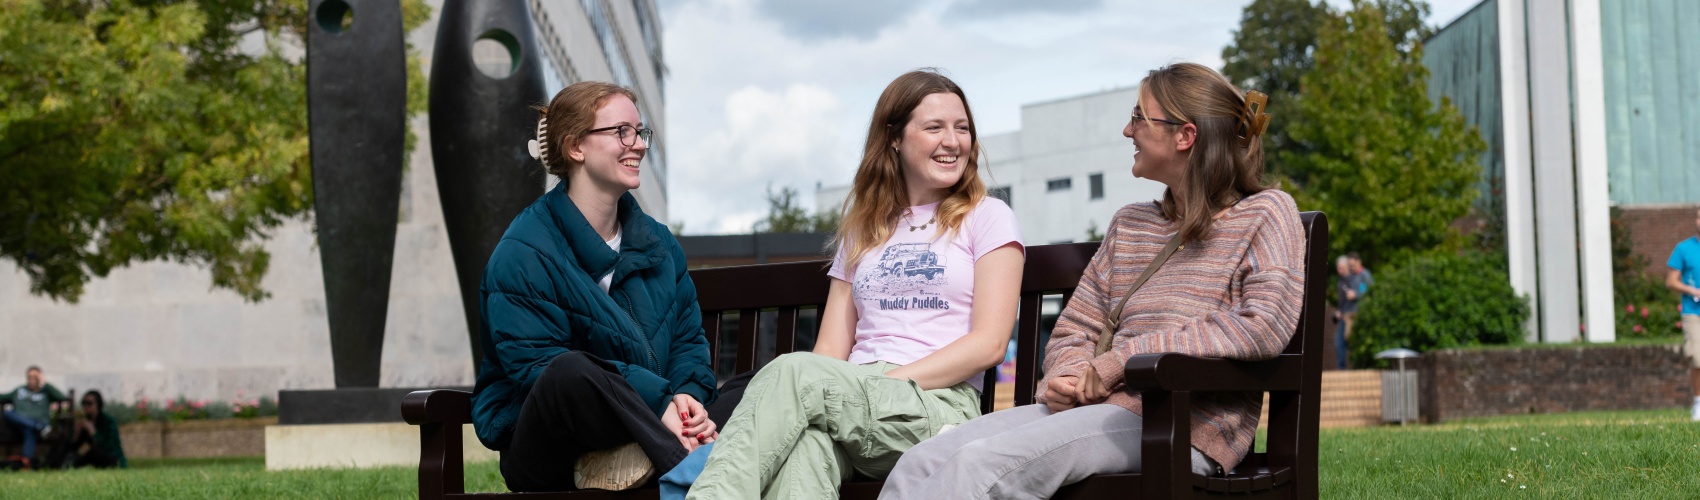 Three students relax and chat on a bench on a leafy university campus. There is a modern sculpture in the background.